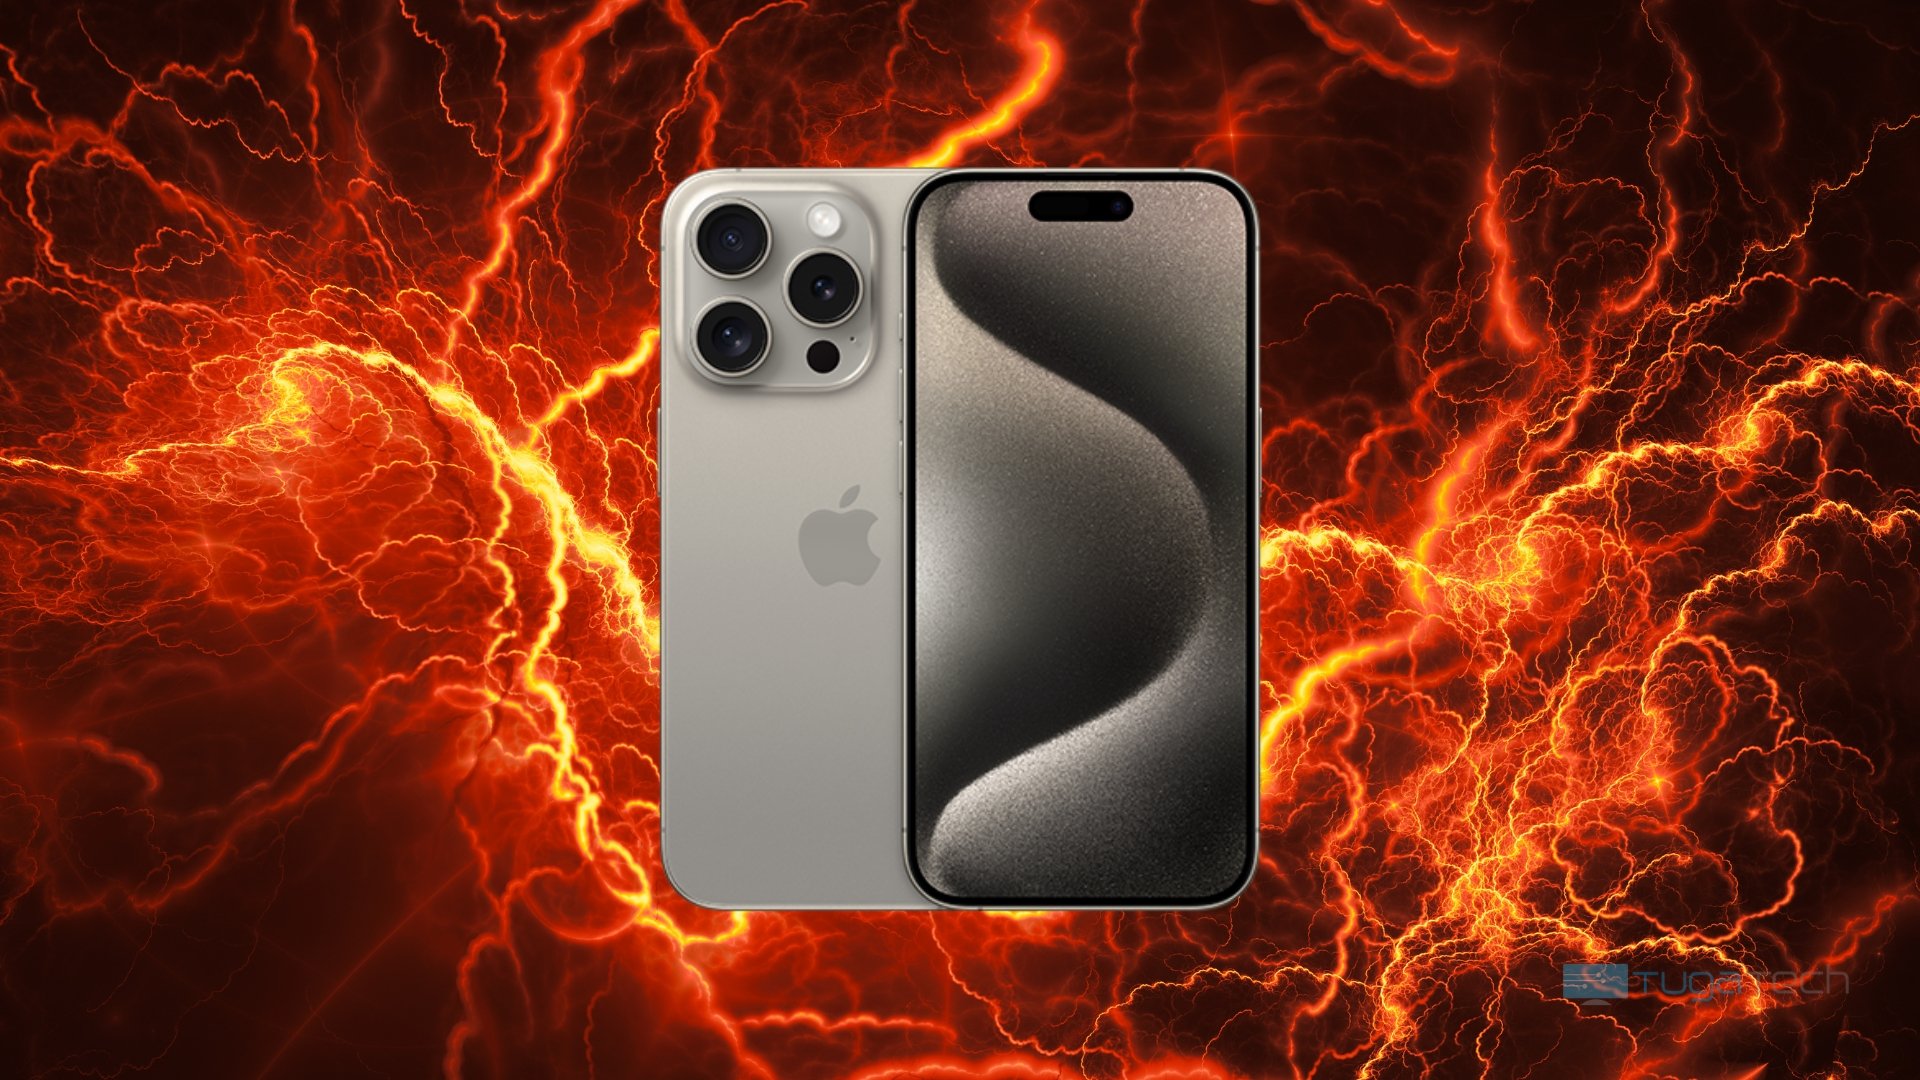 Users have reported overheating issues on the iPhone 15 Pro